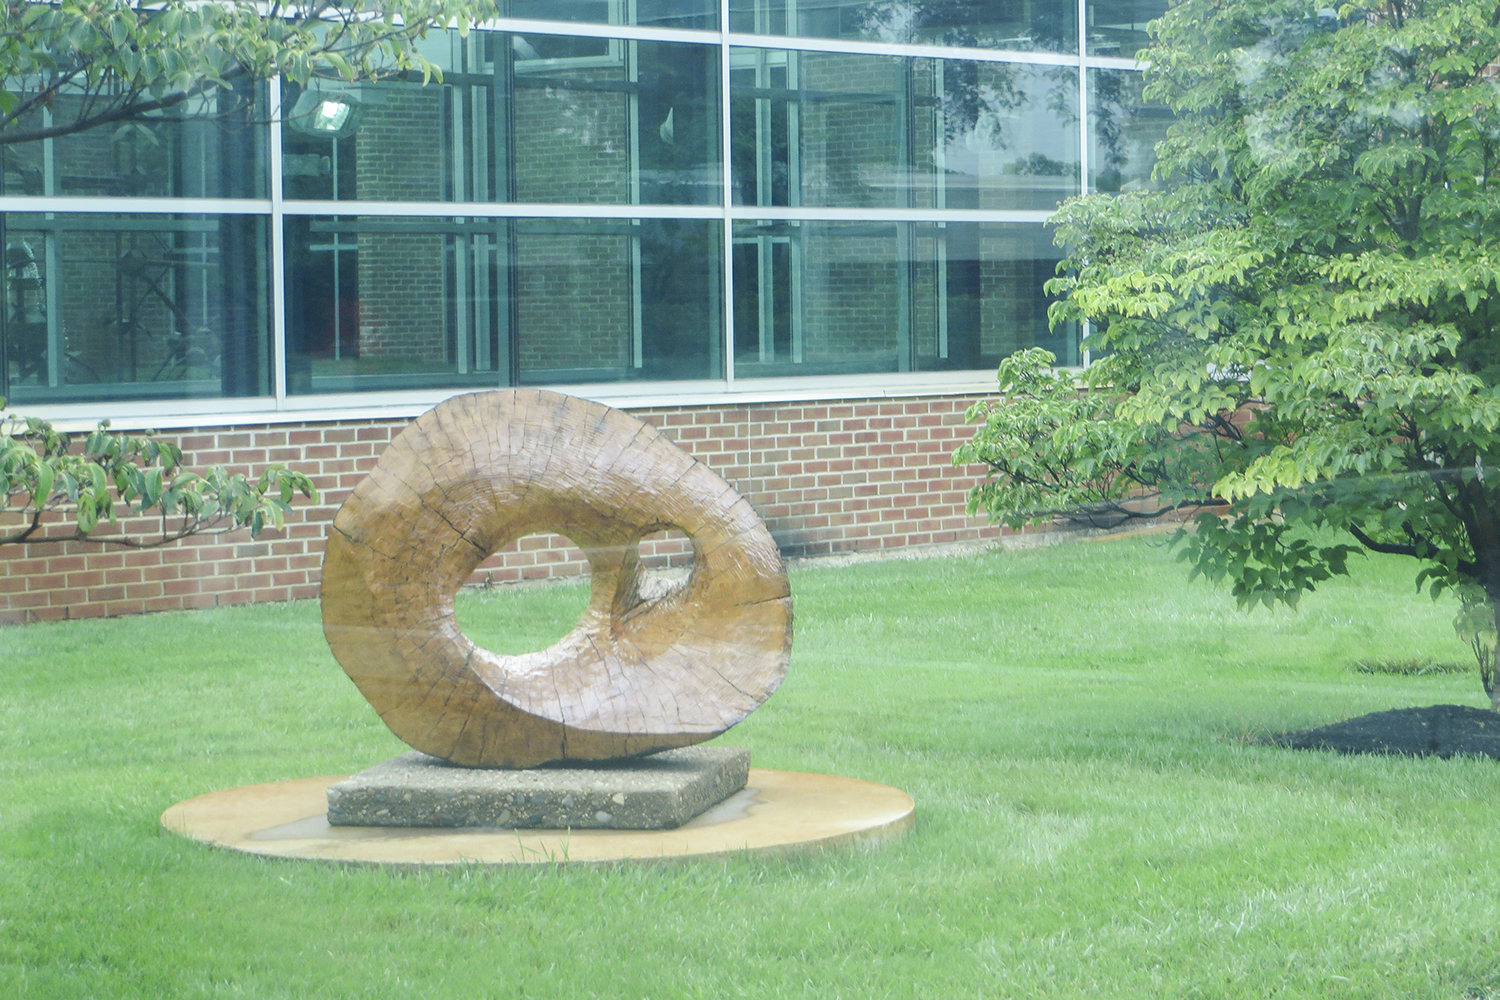 A photo of a sculpture on KCC's North Avenue campus.